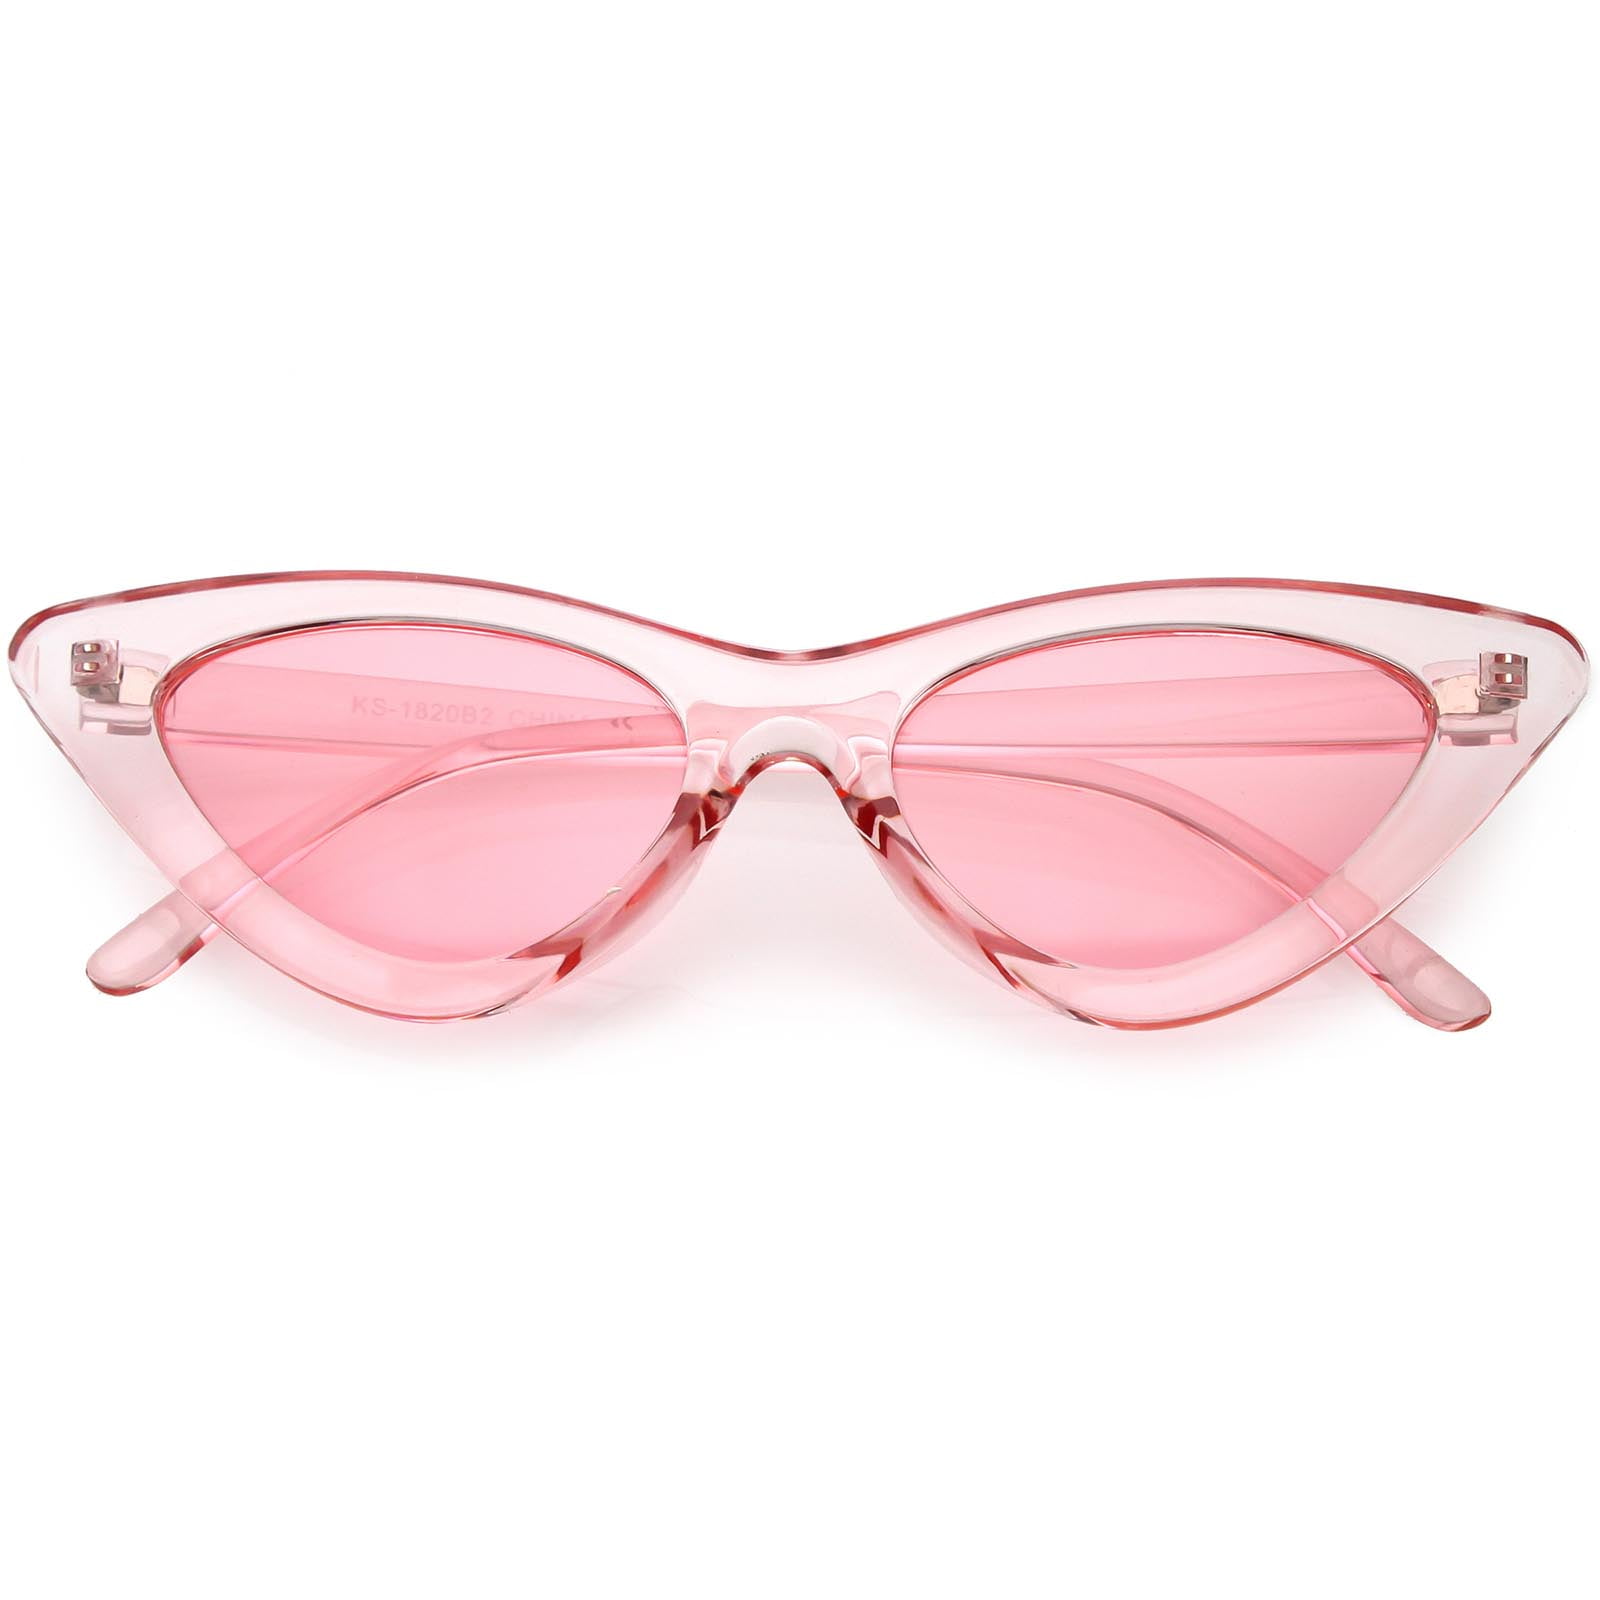 Womens Exaggerated Translucent Cat Eye Sunglasses Color Tinted Lens 48mm Pink Pink